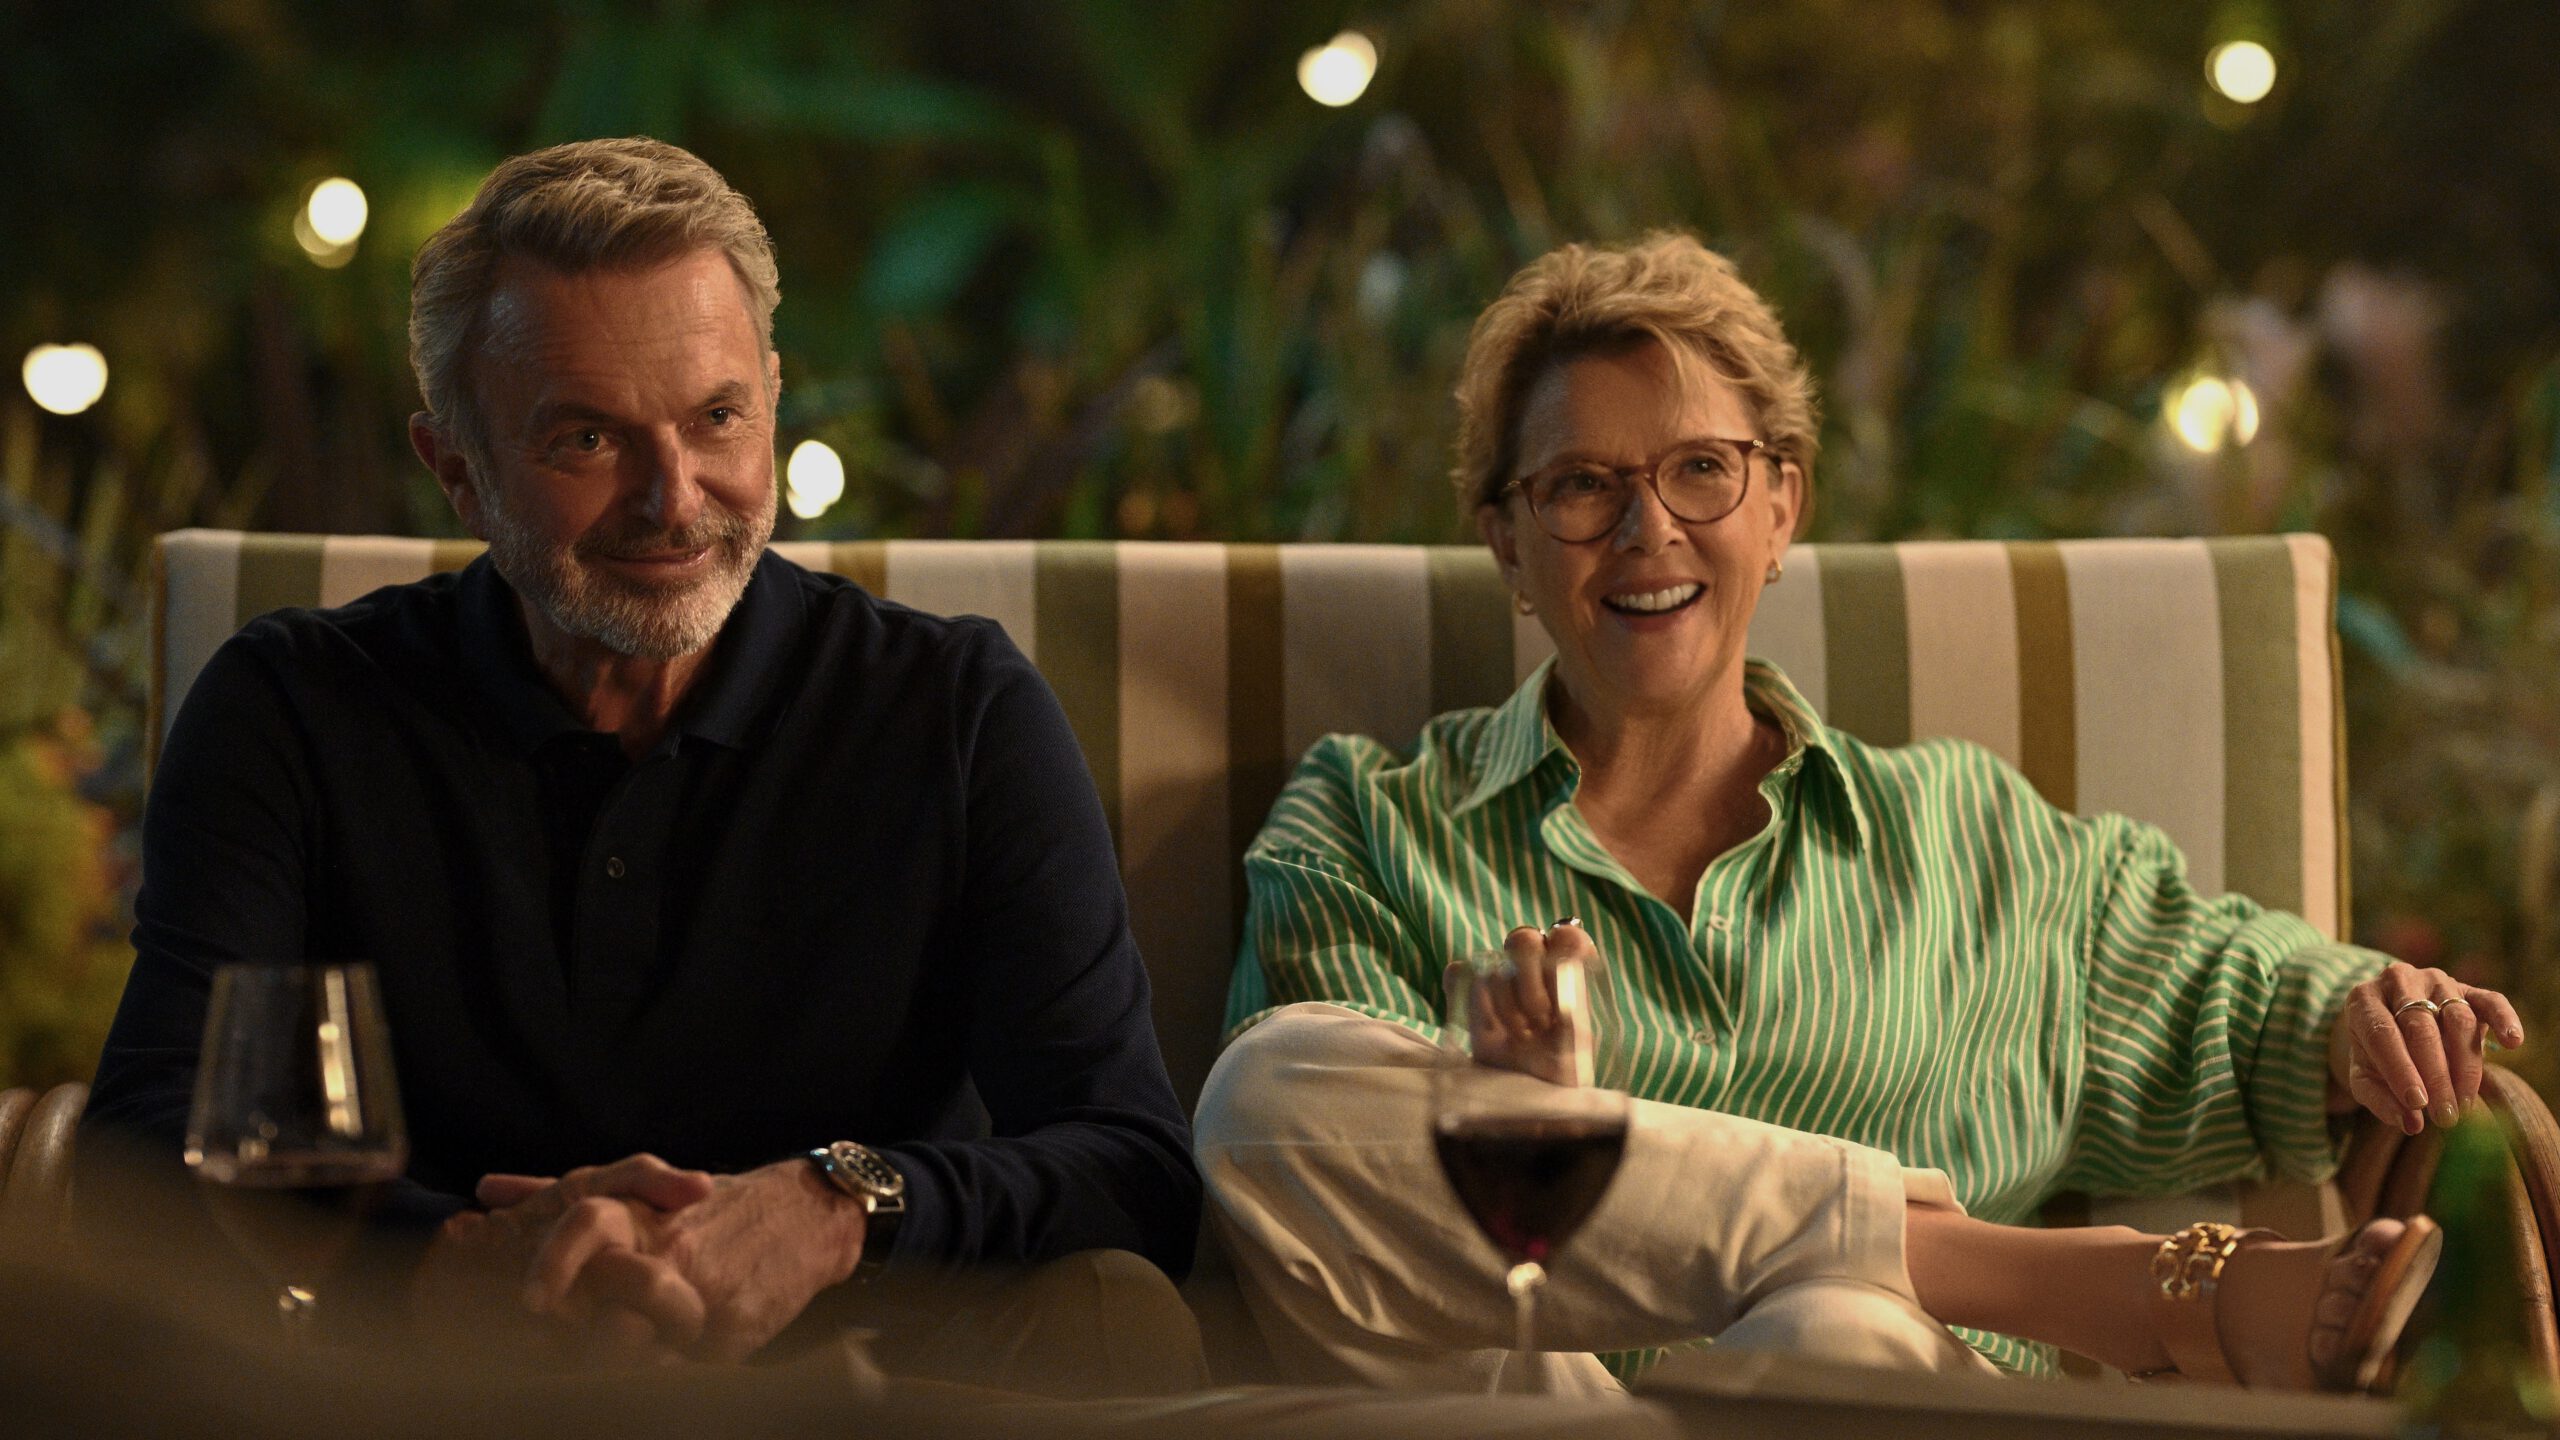 Sam Neill and Annette Bening star in 